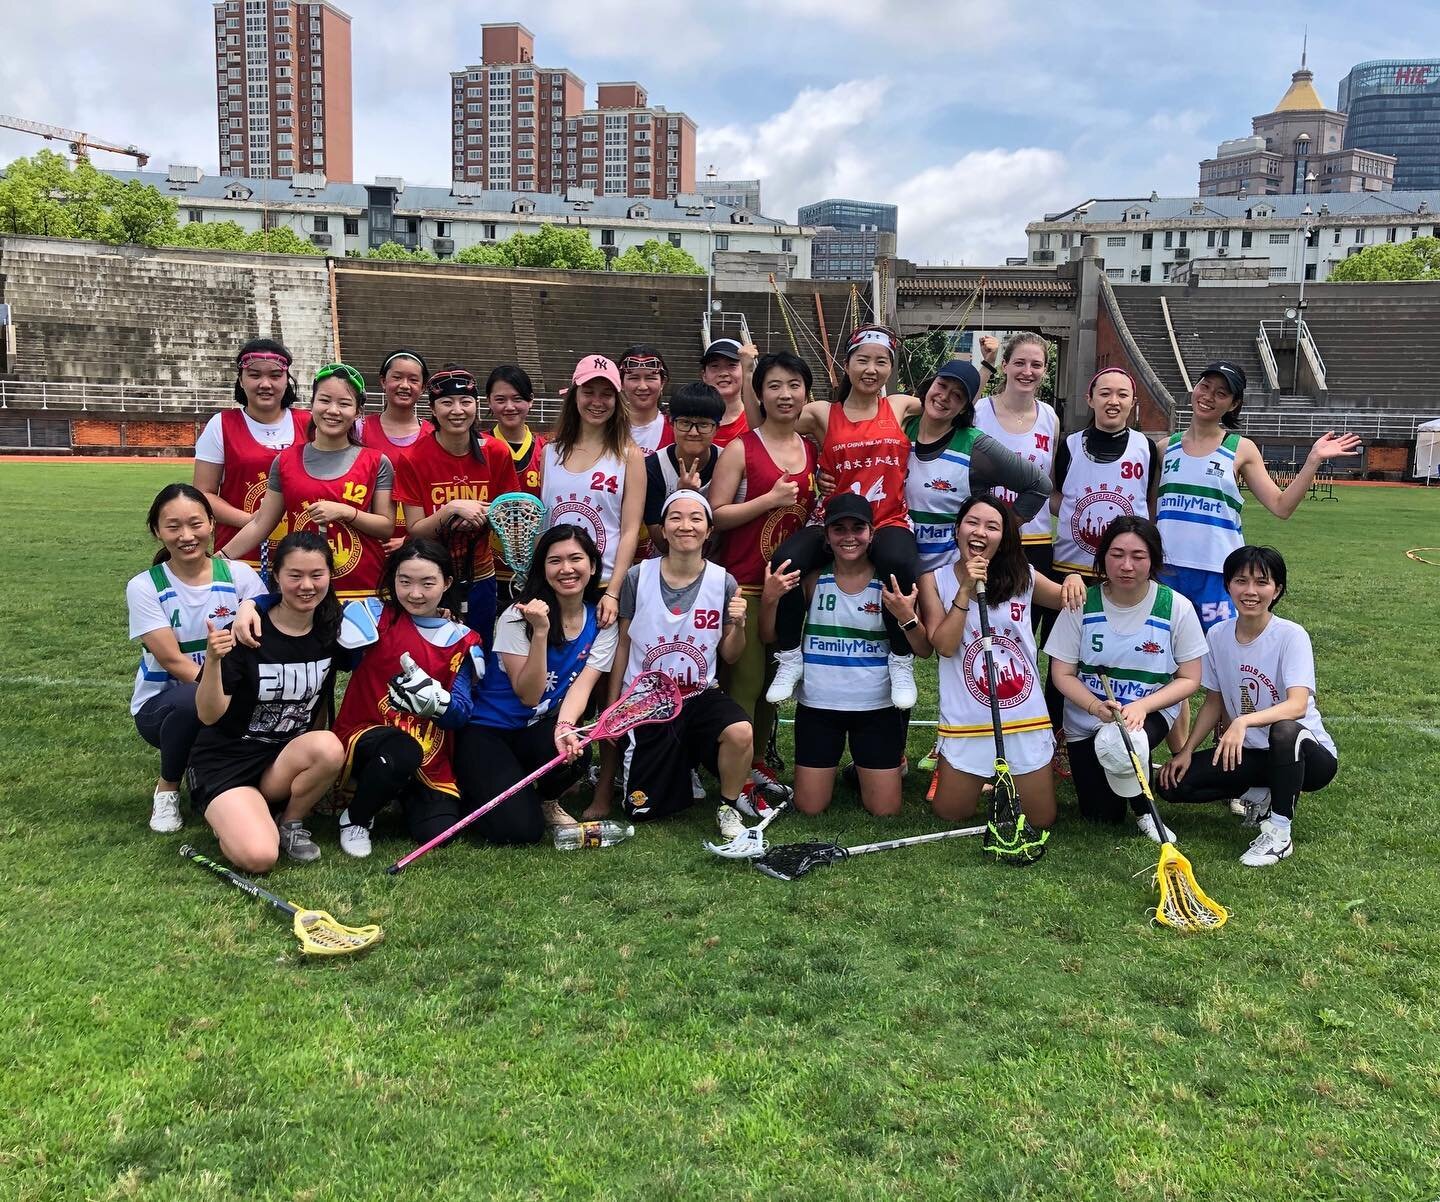 Women&rsquo;s last game - 2020 spring season

tired of 🌧🌧🌧? Let&rsquo;s play 🥍 and get 💦 anyway!!
We&rsquo;ll probably play most weekends until late August, so join us if you are in Shanghai!! We can&rsquo;t travel... BUT we can play lax 🥍

#la